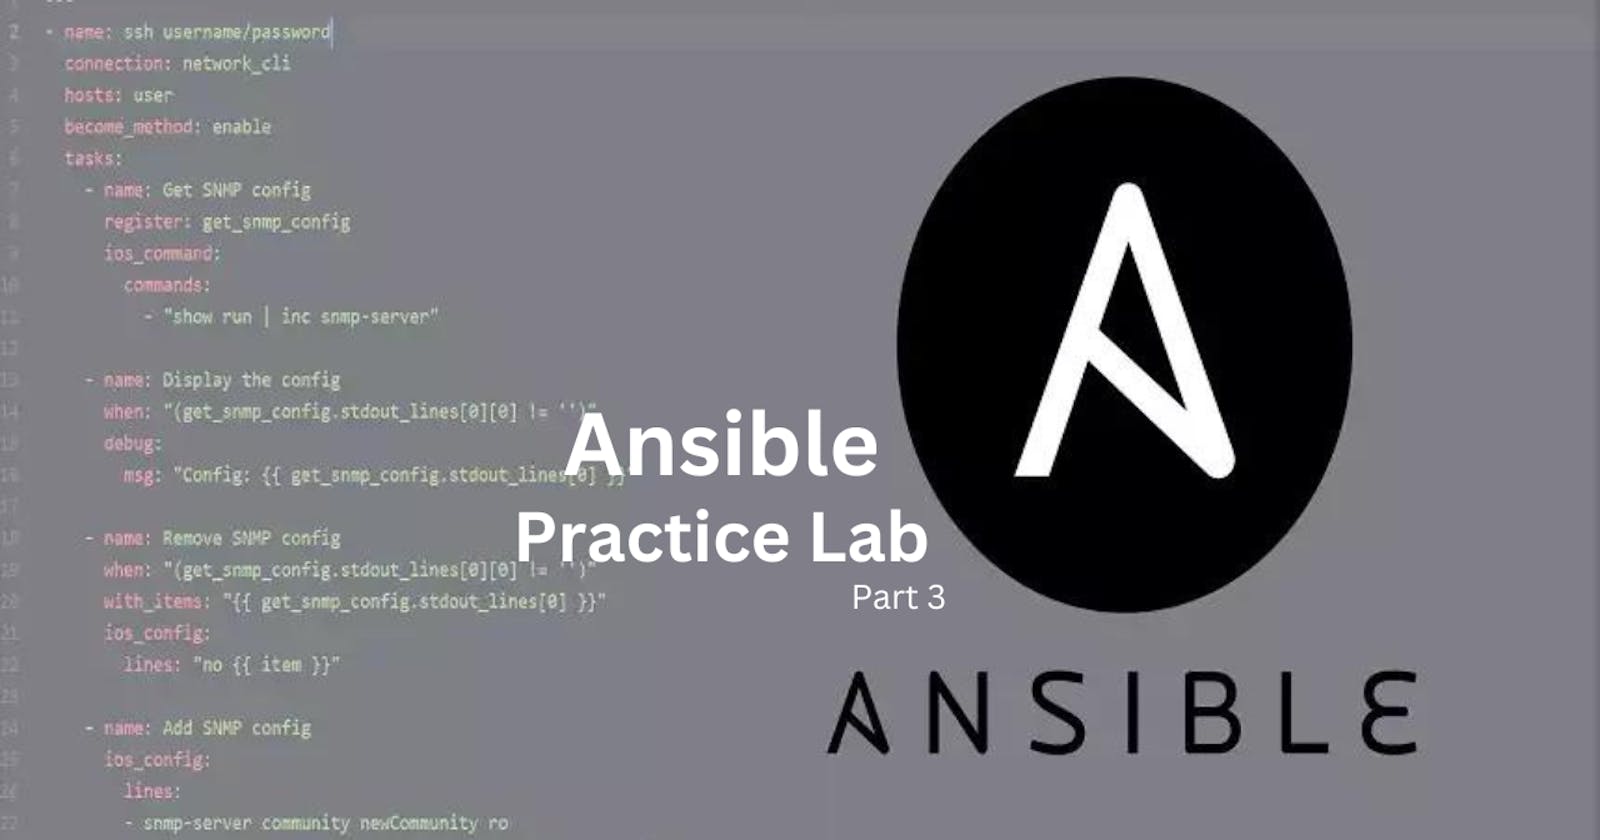 Ansible 3: Practice LAB